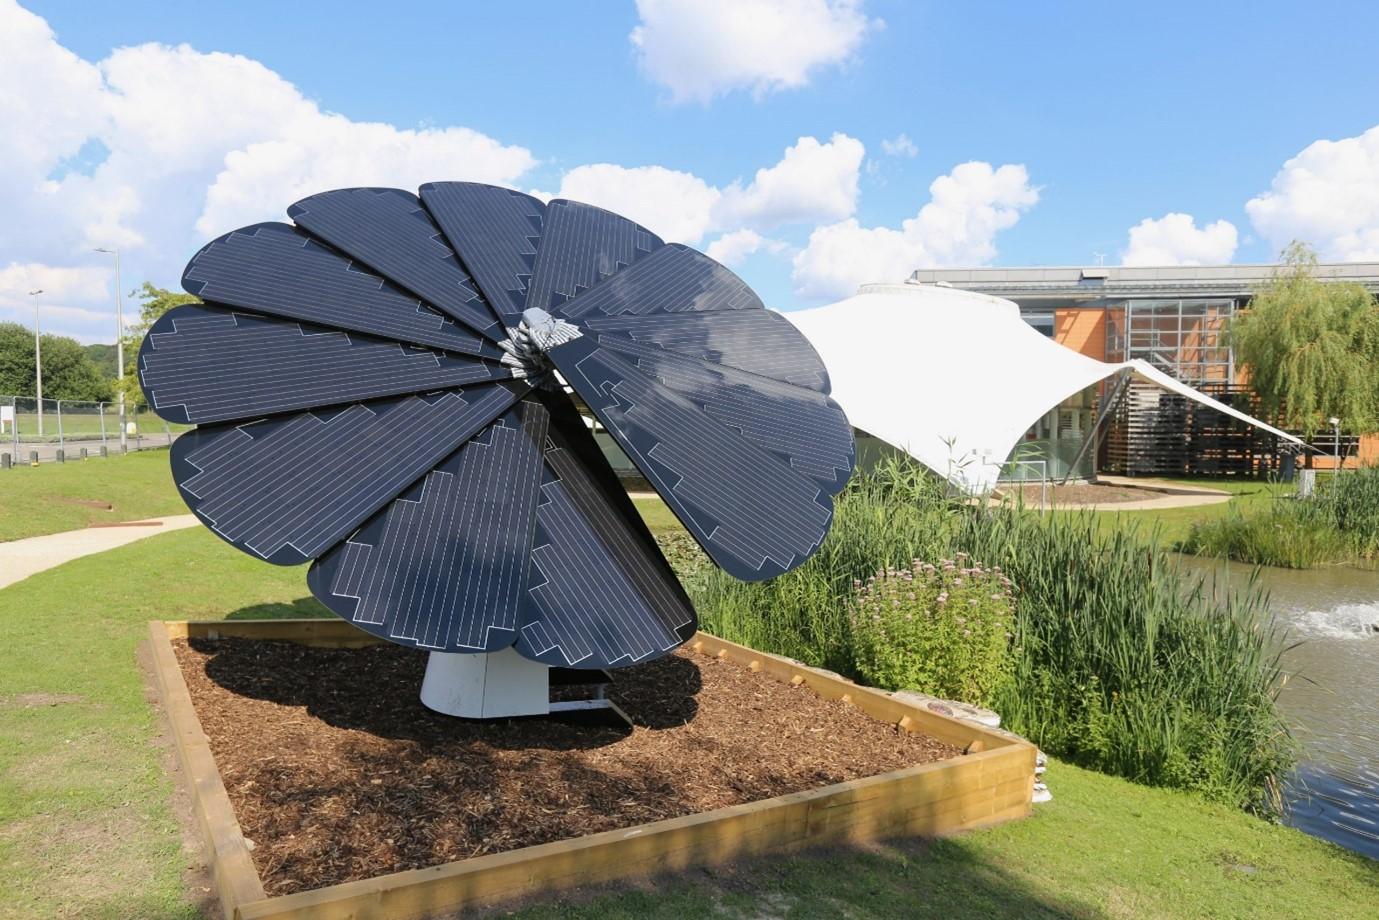 ‘Smartflower’ solar solutions have been installed at our sites in Spain and the UK